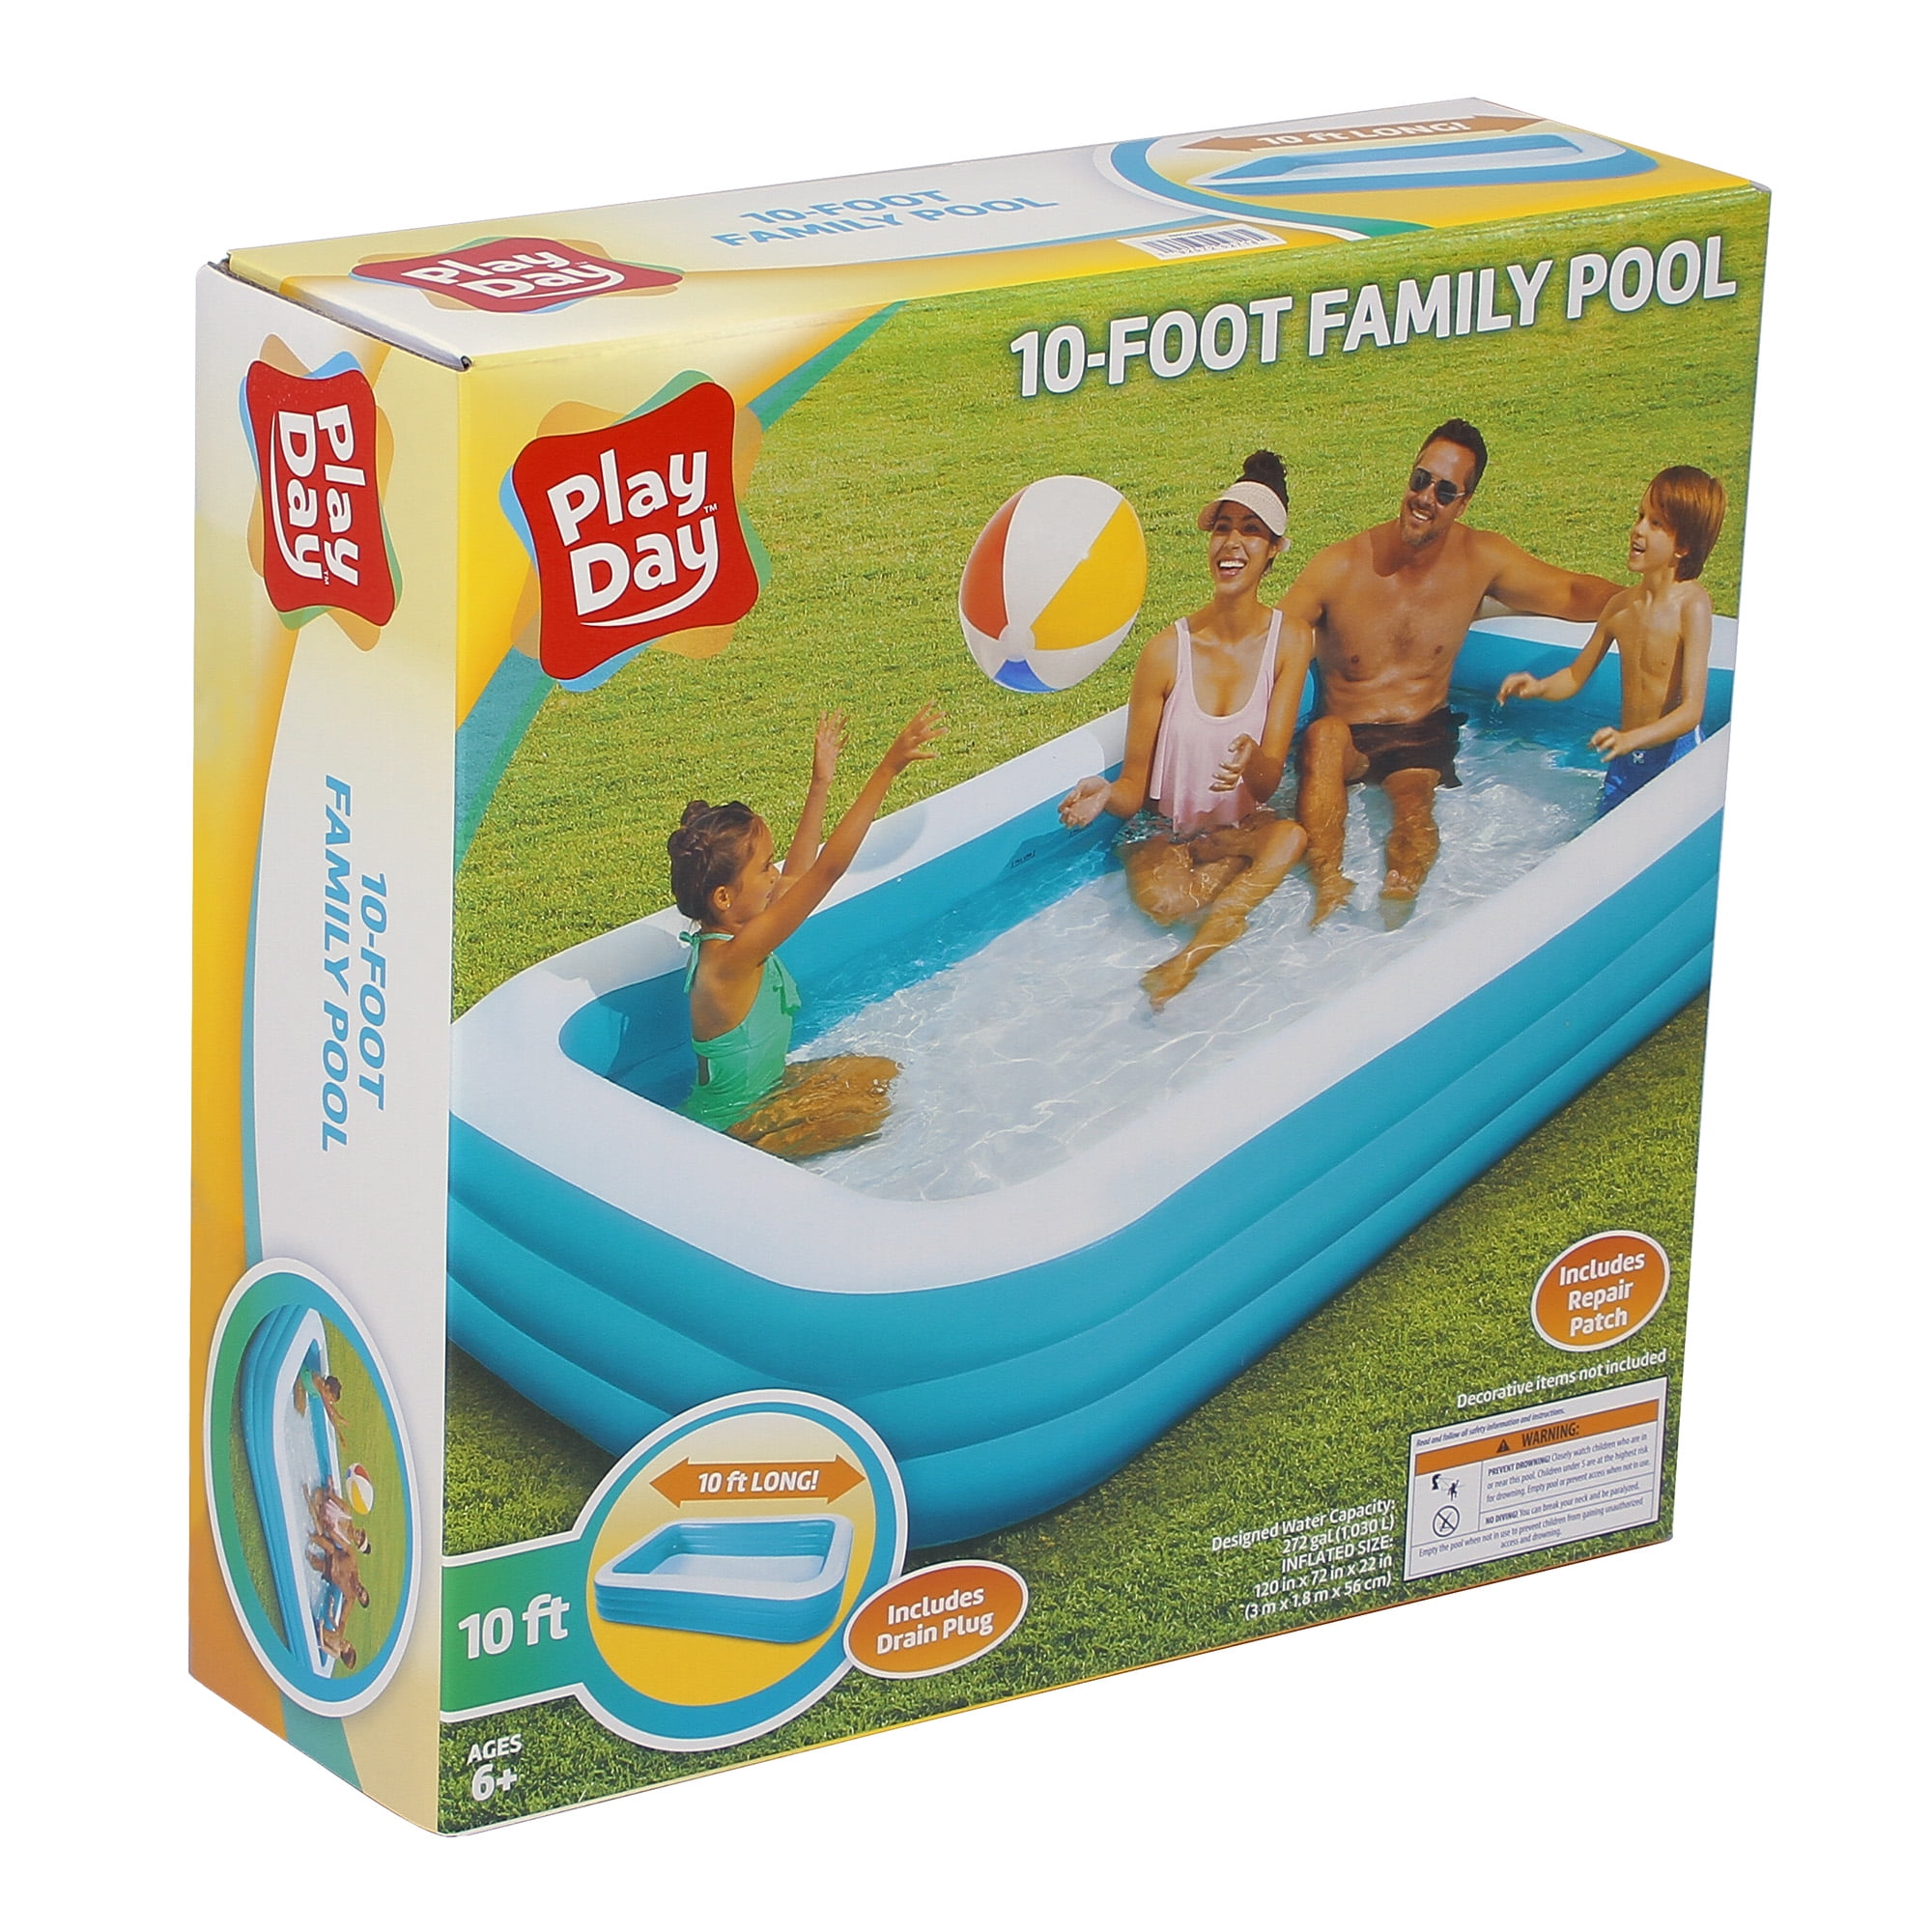 New Play Day Inflatable 10 Foot Rectangular Family Pool 120"x72"x22" 